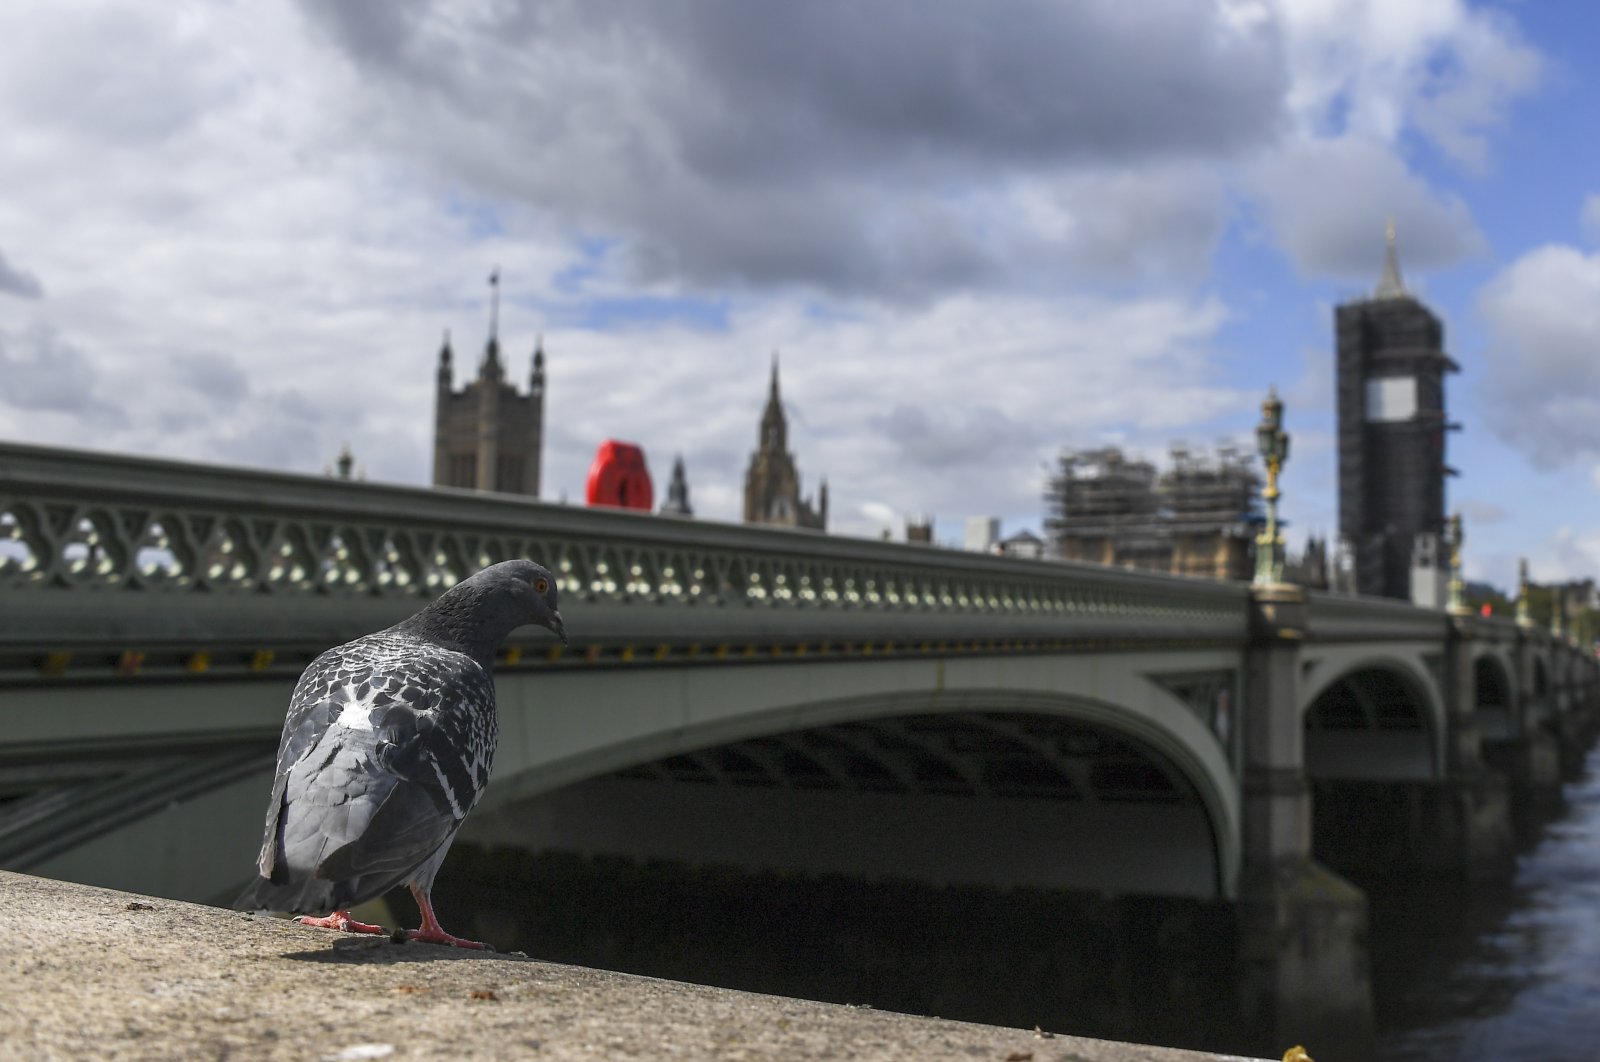 A pigeon stands on the south bank of the river Thames, against the backdrop of the Houses of Parliament, as the country continues its lockdown to curb the spread of coronavirus, in London, Friday, May 1, 2020. (AP Photo)